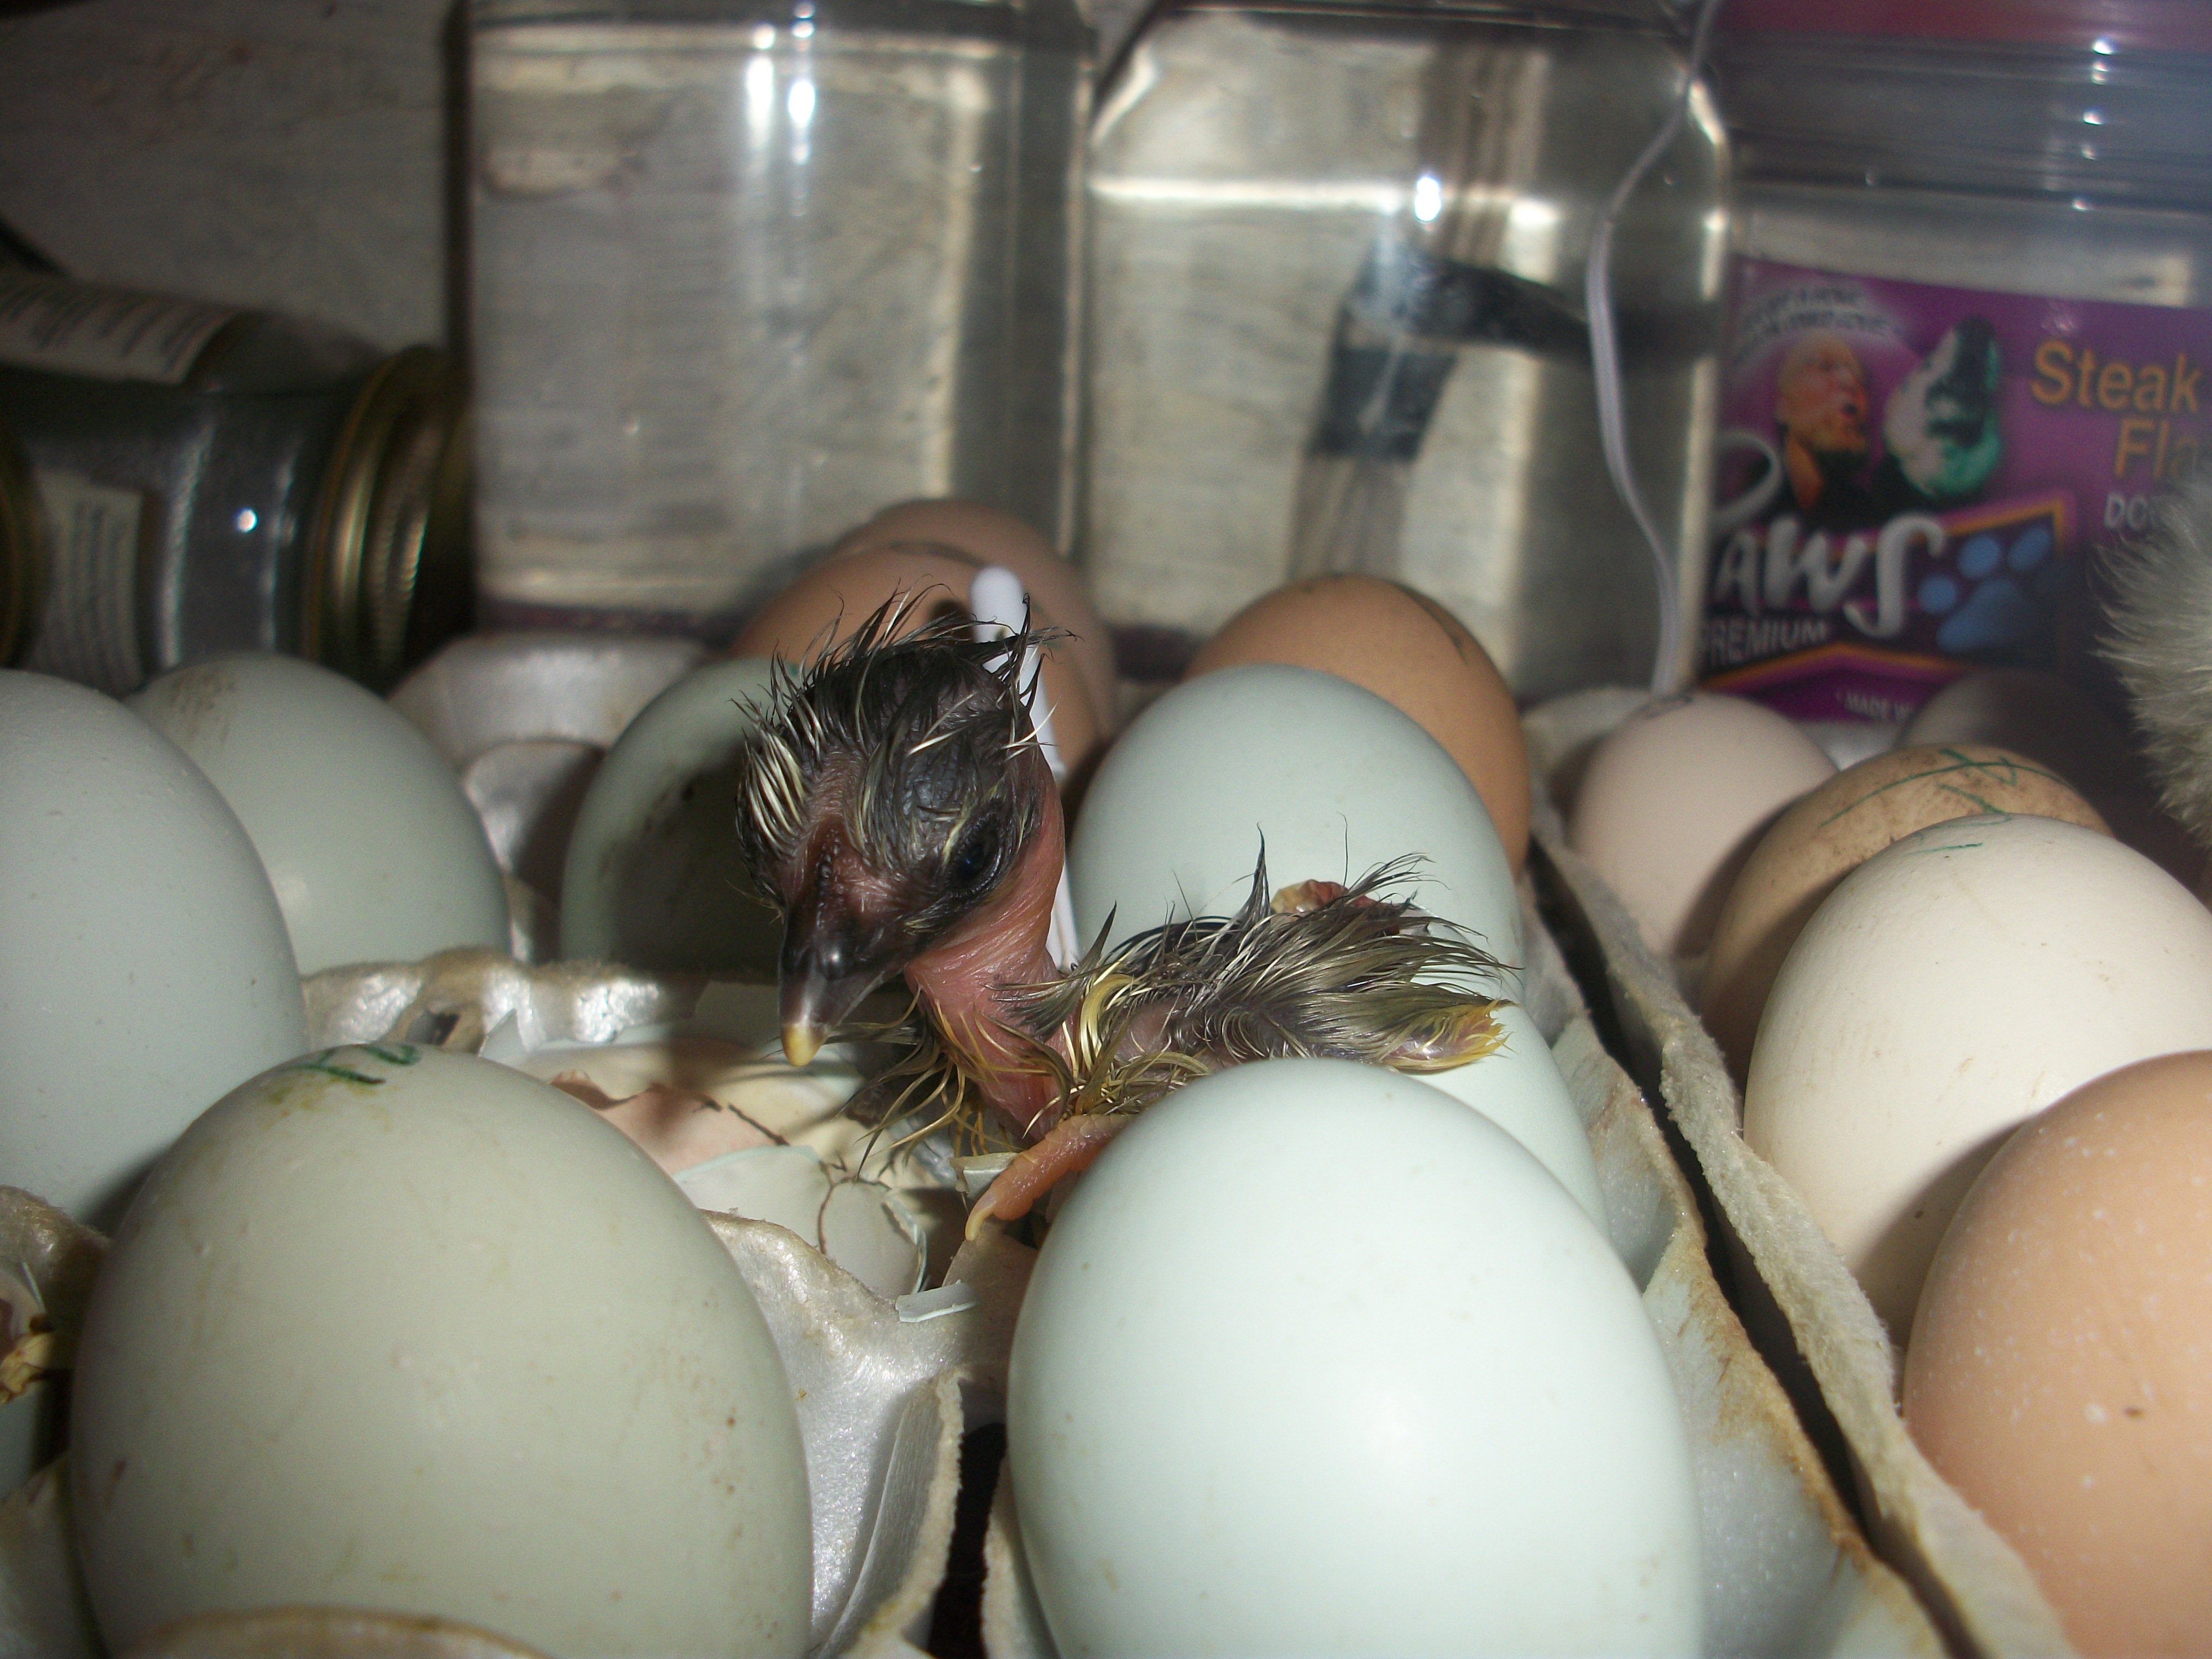 Naked Neck Green-Egger hatched 1/12/12
Little beauty just popping out (pic 1)